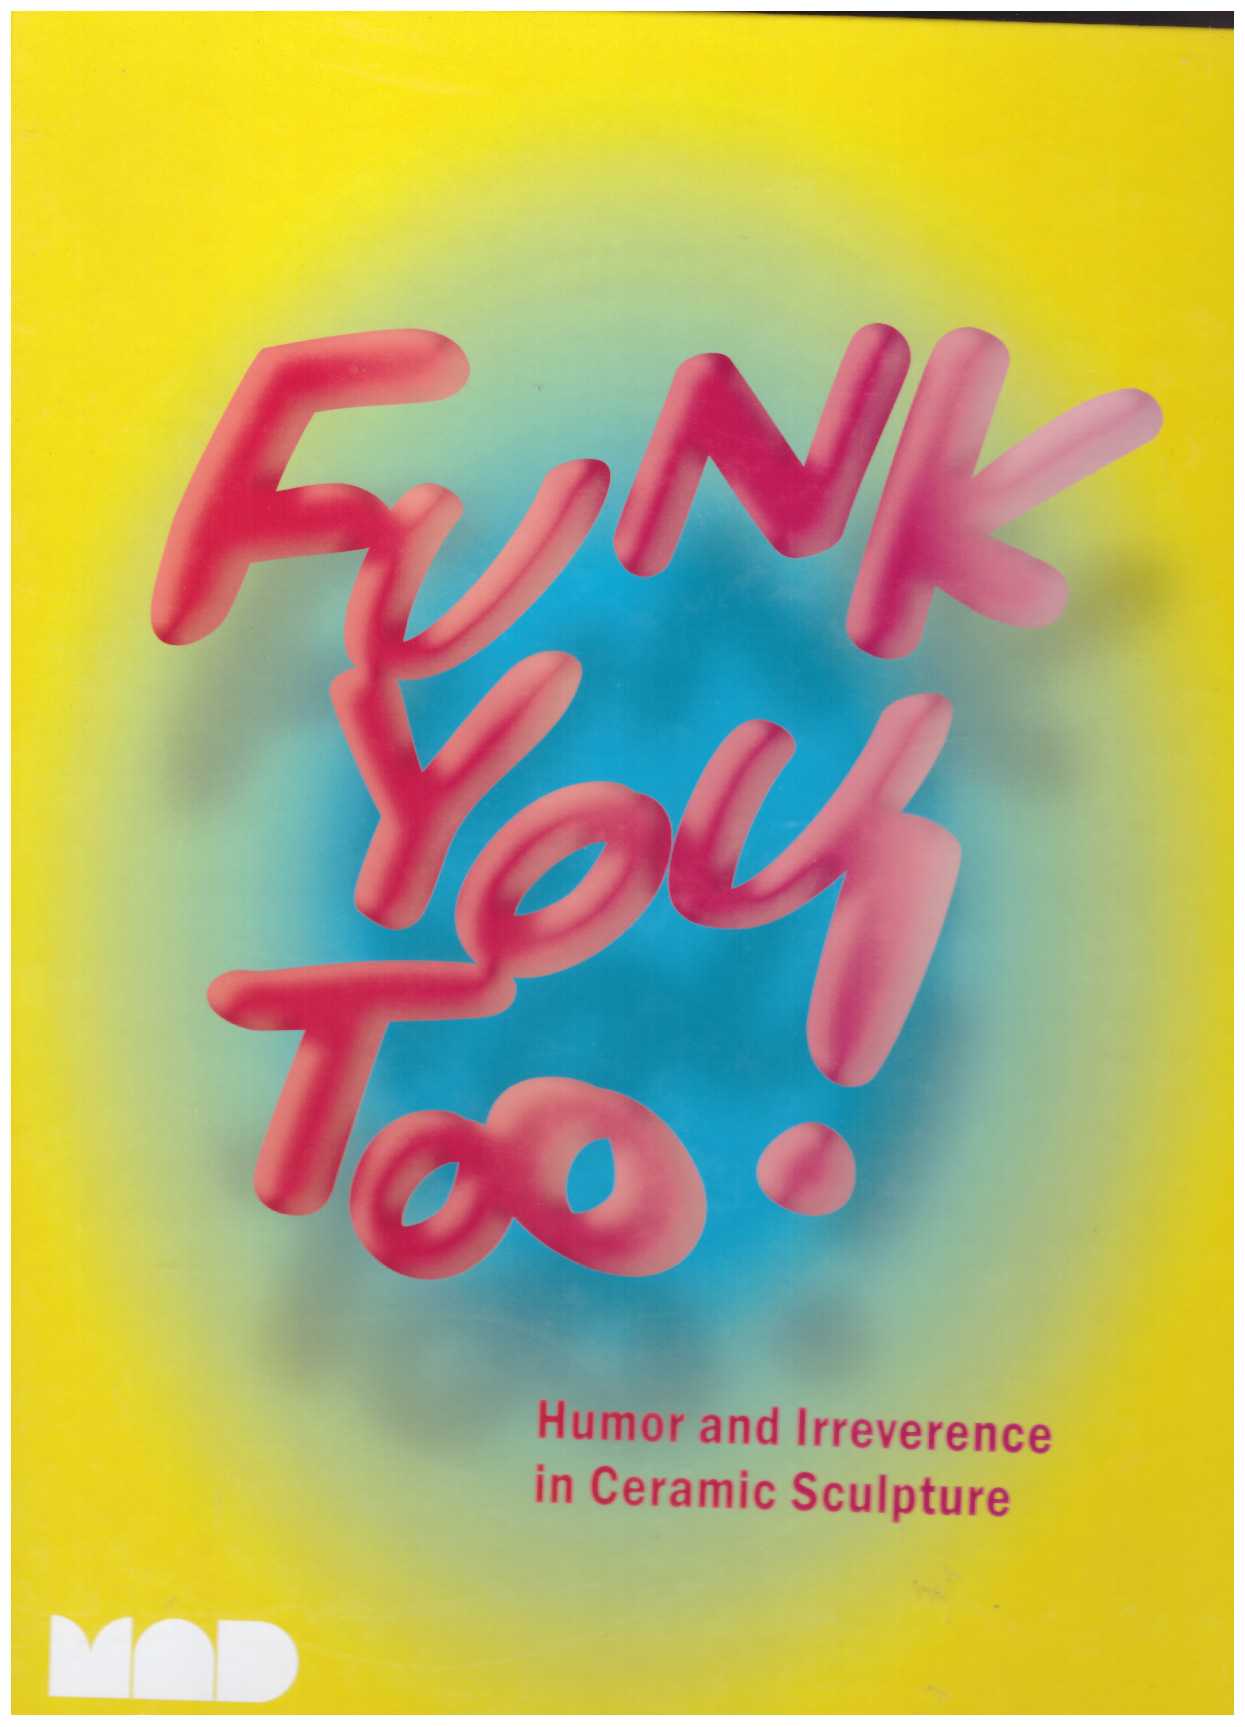 VIZCARRONDO-LABOY, Angelik (ed.) - Funk You Too! Humor and Irreverence in Ceramic Sculpture